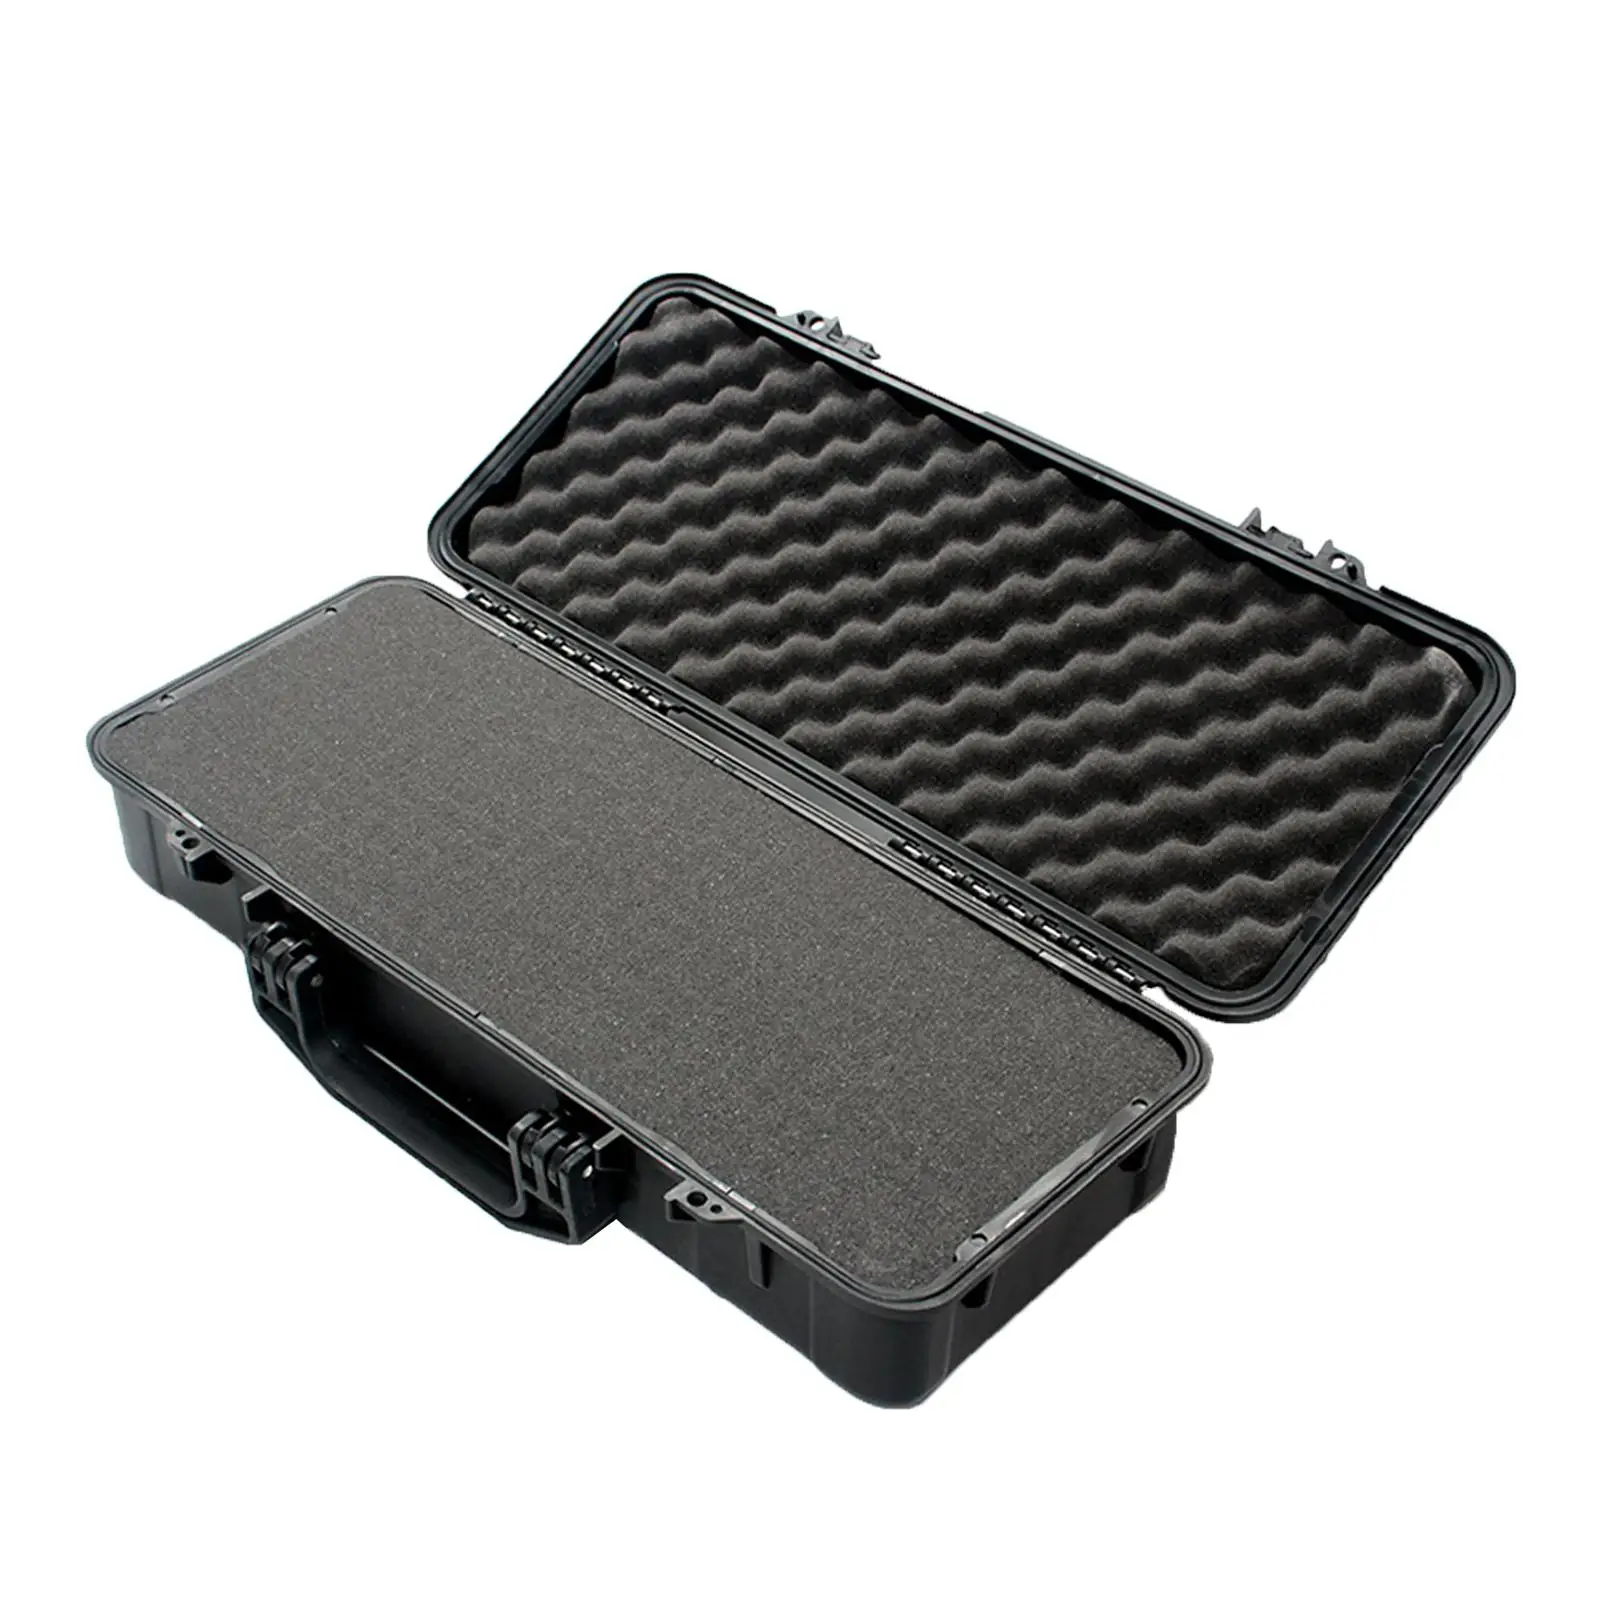 Equipment Tool Box Protects Electronics, Tools, Cameras and Testing Equipment High Temperature Resistant Portable Carrying Case